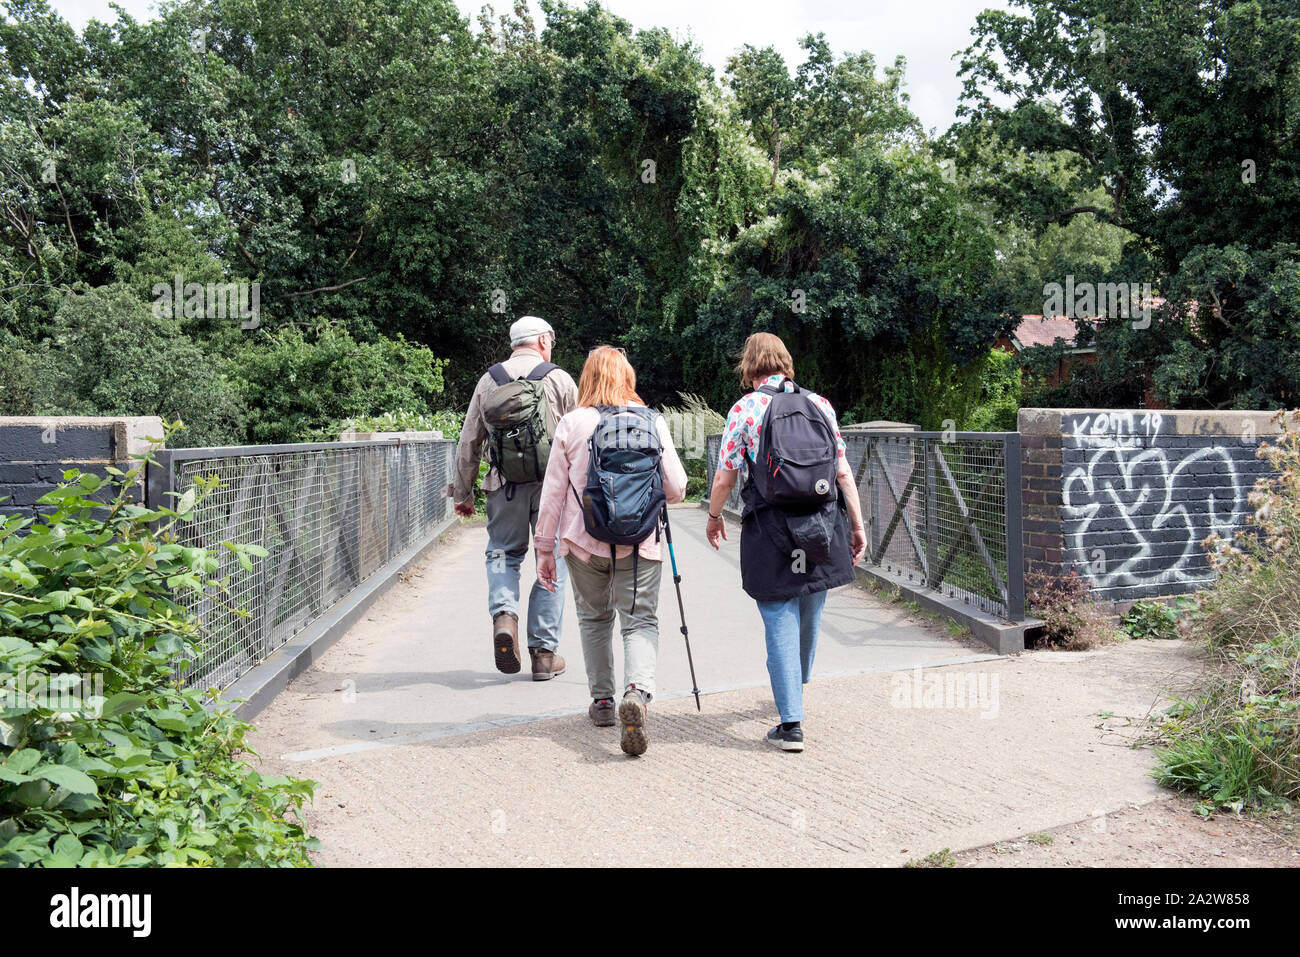 People walking along the Parkland Walk a disused railway line now an urban nature reserve, London Borough of Haringey England Britain UK Stock Photo